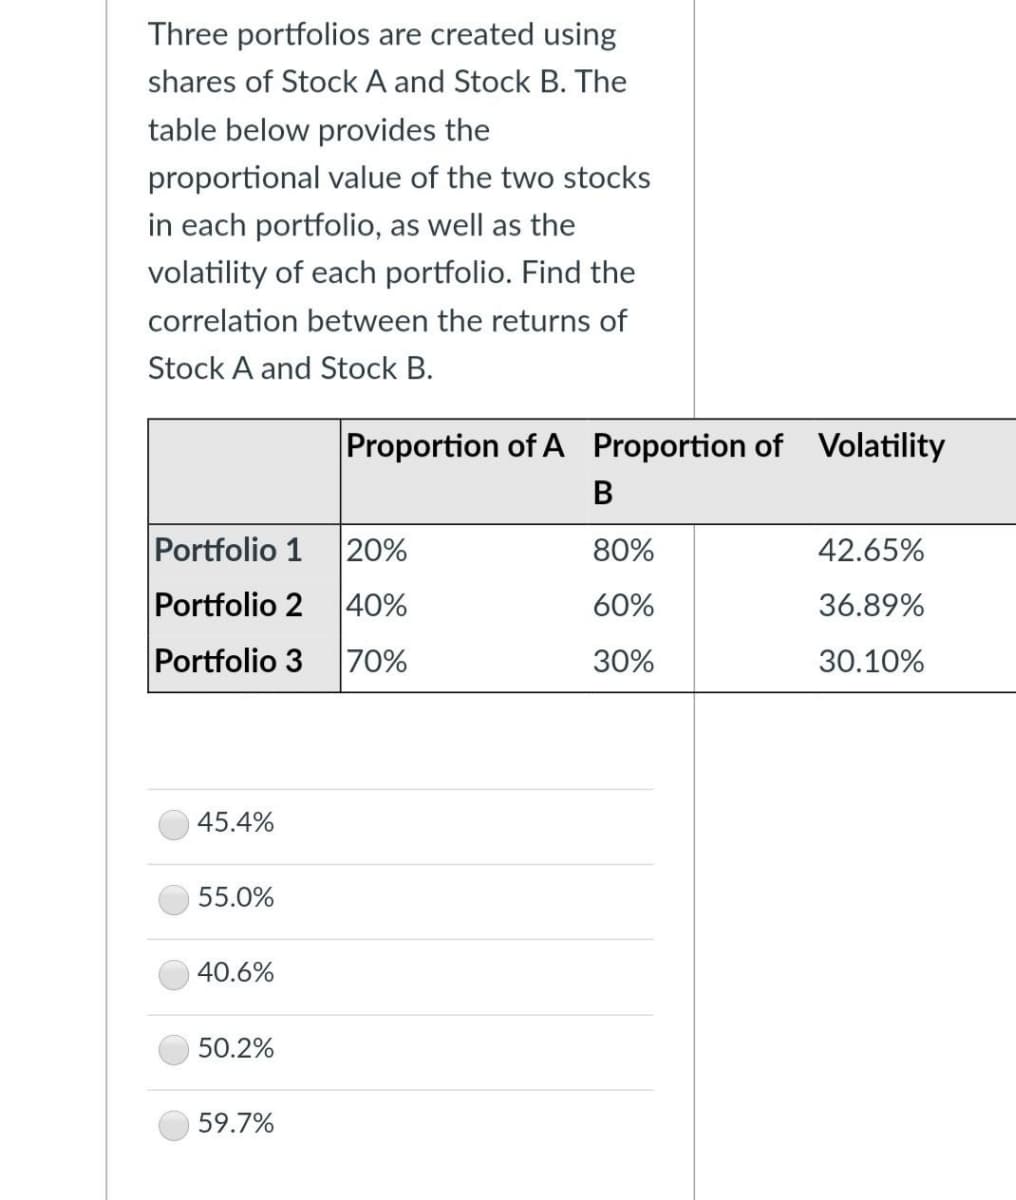 Three portfolios are created using
shares of Stock A and Stock B. The
table below provides the
proportional value of the two stocks
in each portfolio, as well as the
volatility of each portfolio. Find the
correlation between the returns of
Stock A and Stock B.
Proportion of A Proportion of Volatility
B
Portfolio 1
20%
80%
42.65%
Portfolio 2
40%
60%
36.89%
Portfolio 3
70%
30%
30.10%
45.4%
55.0%
40.6%
50.2%
59.7%
